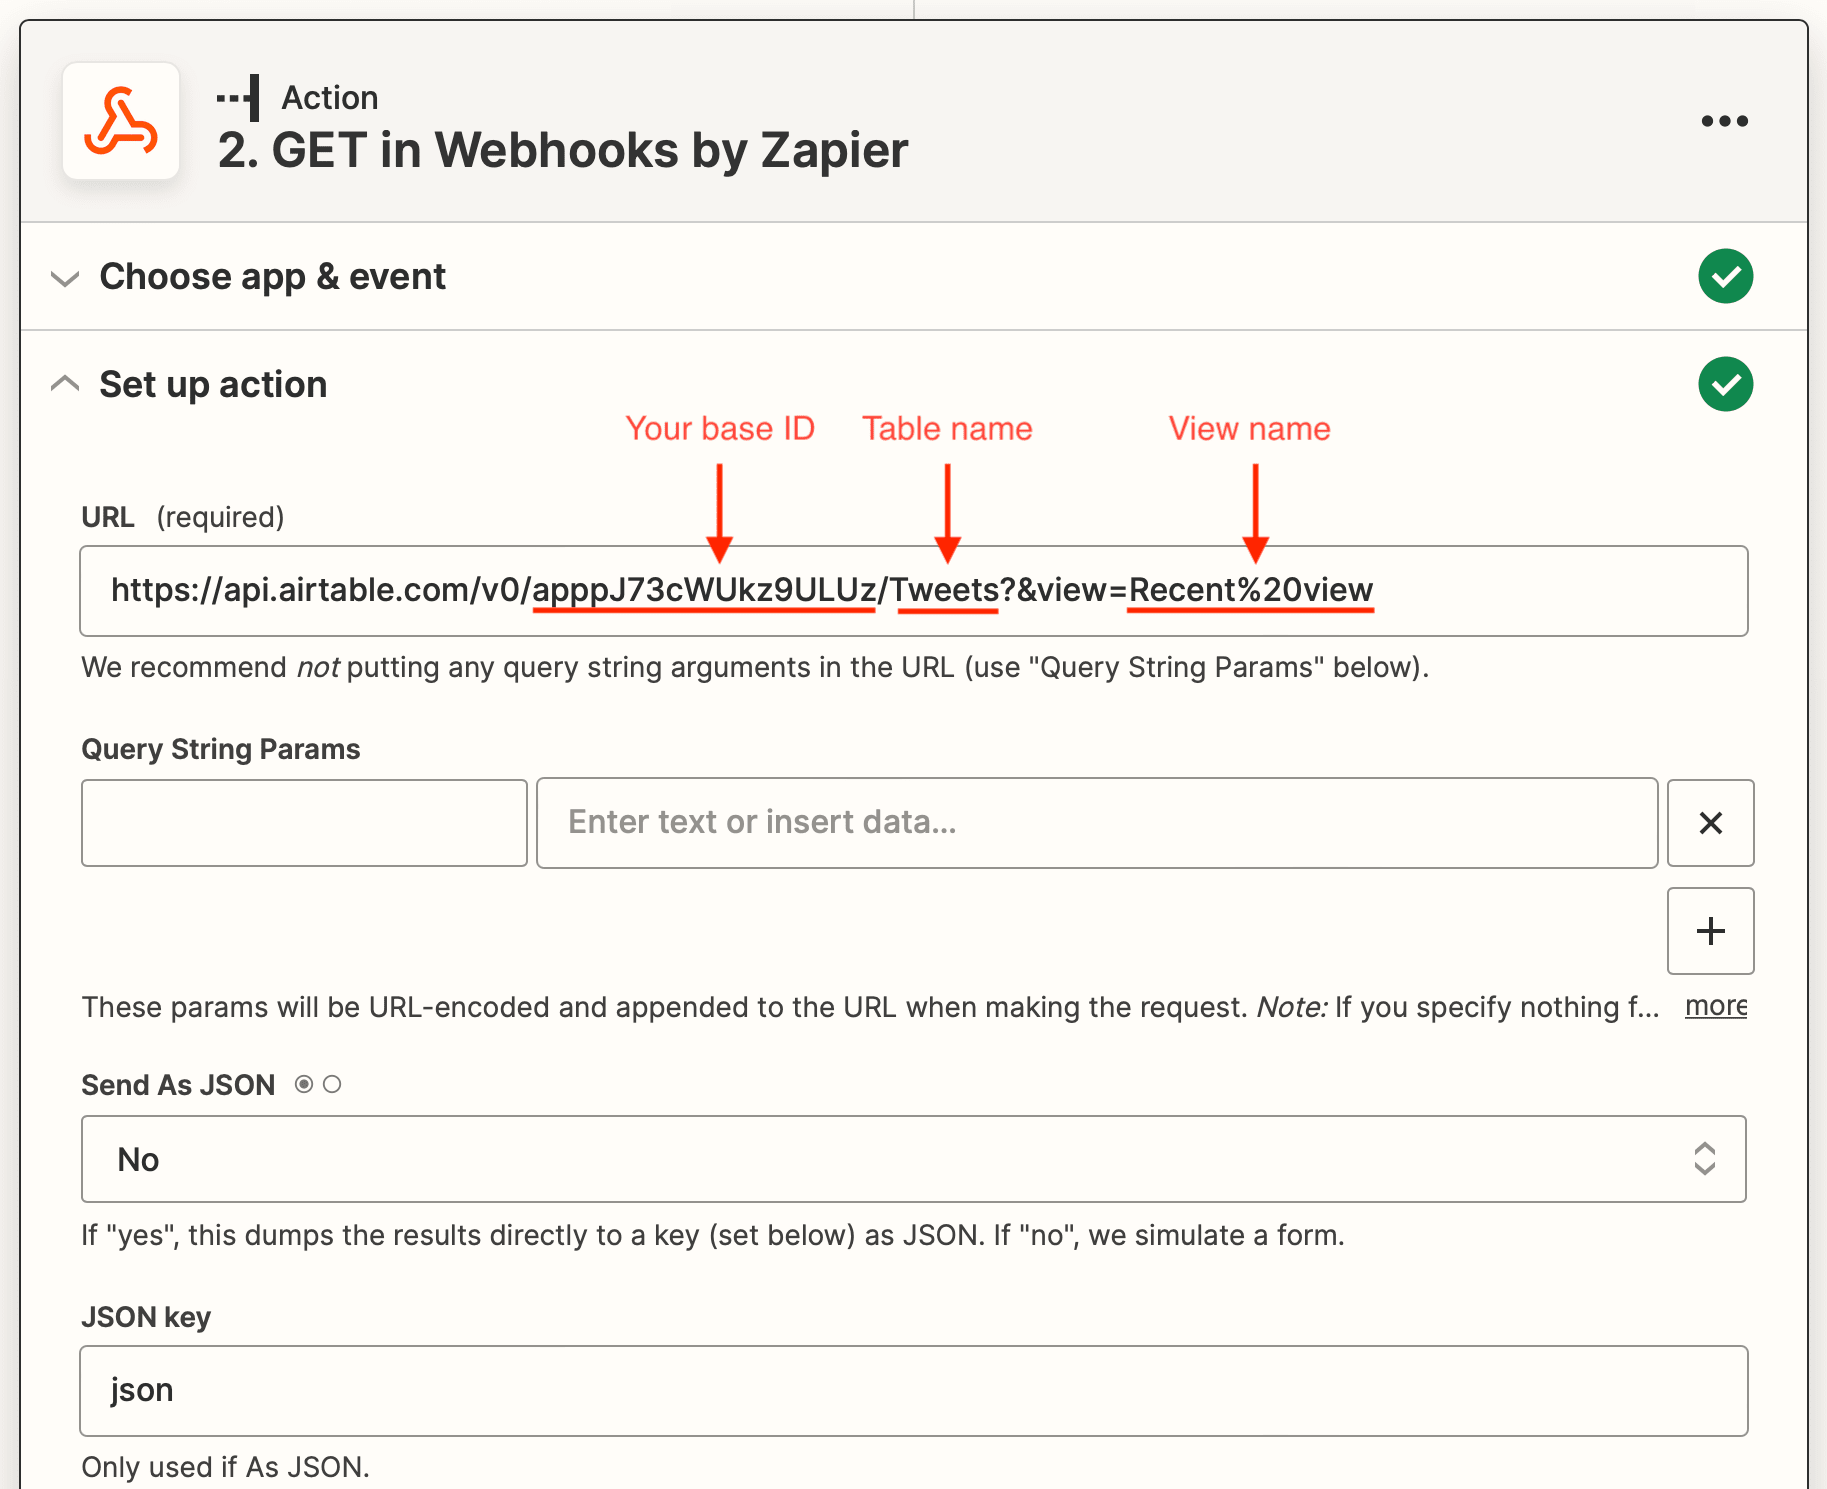 Screenshot of Zapier GET in webhooks action with red text pointing to customizable URL segments